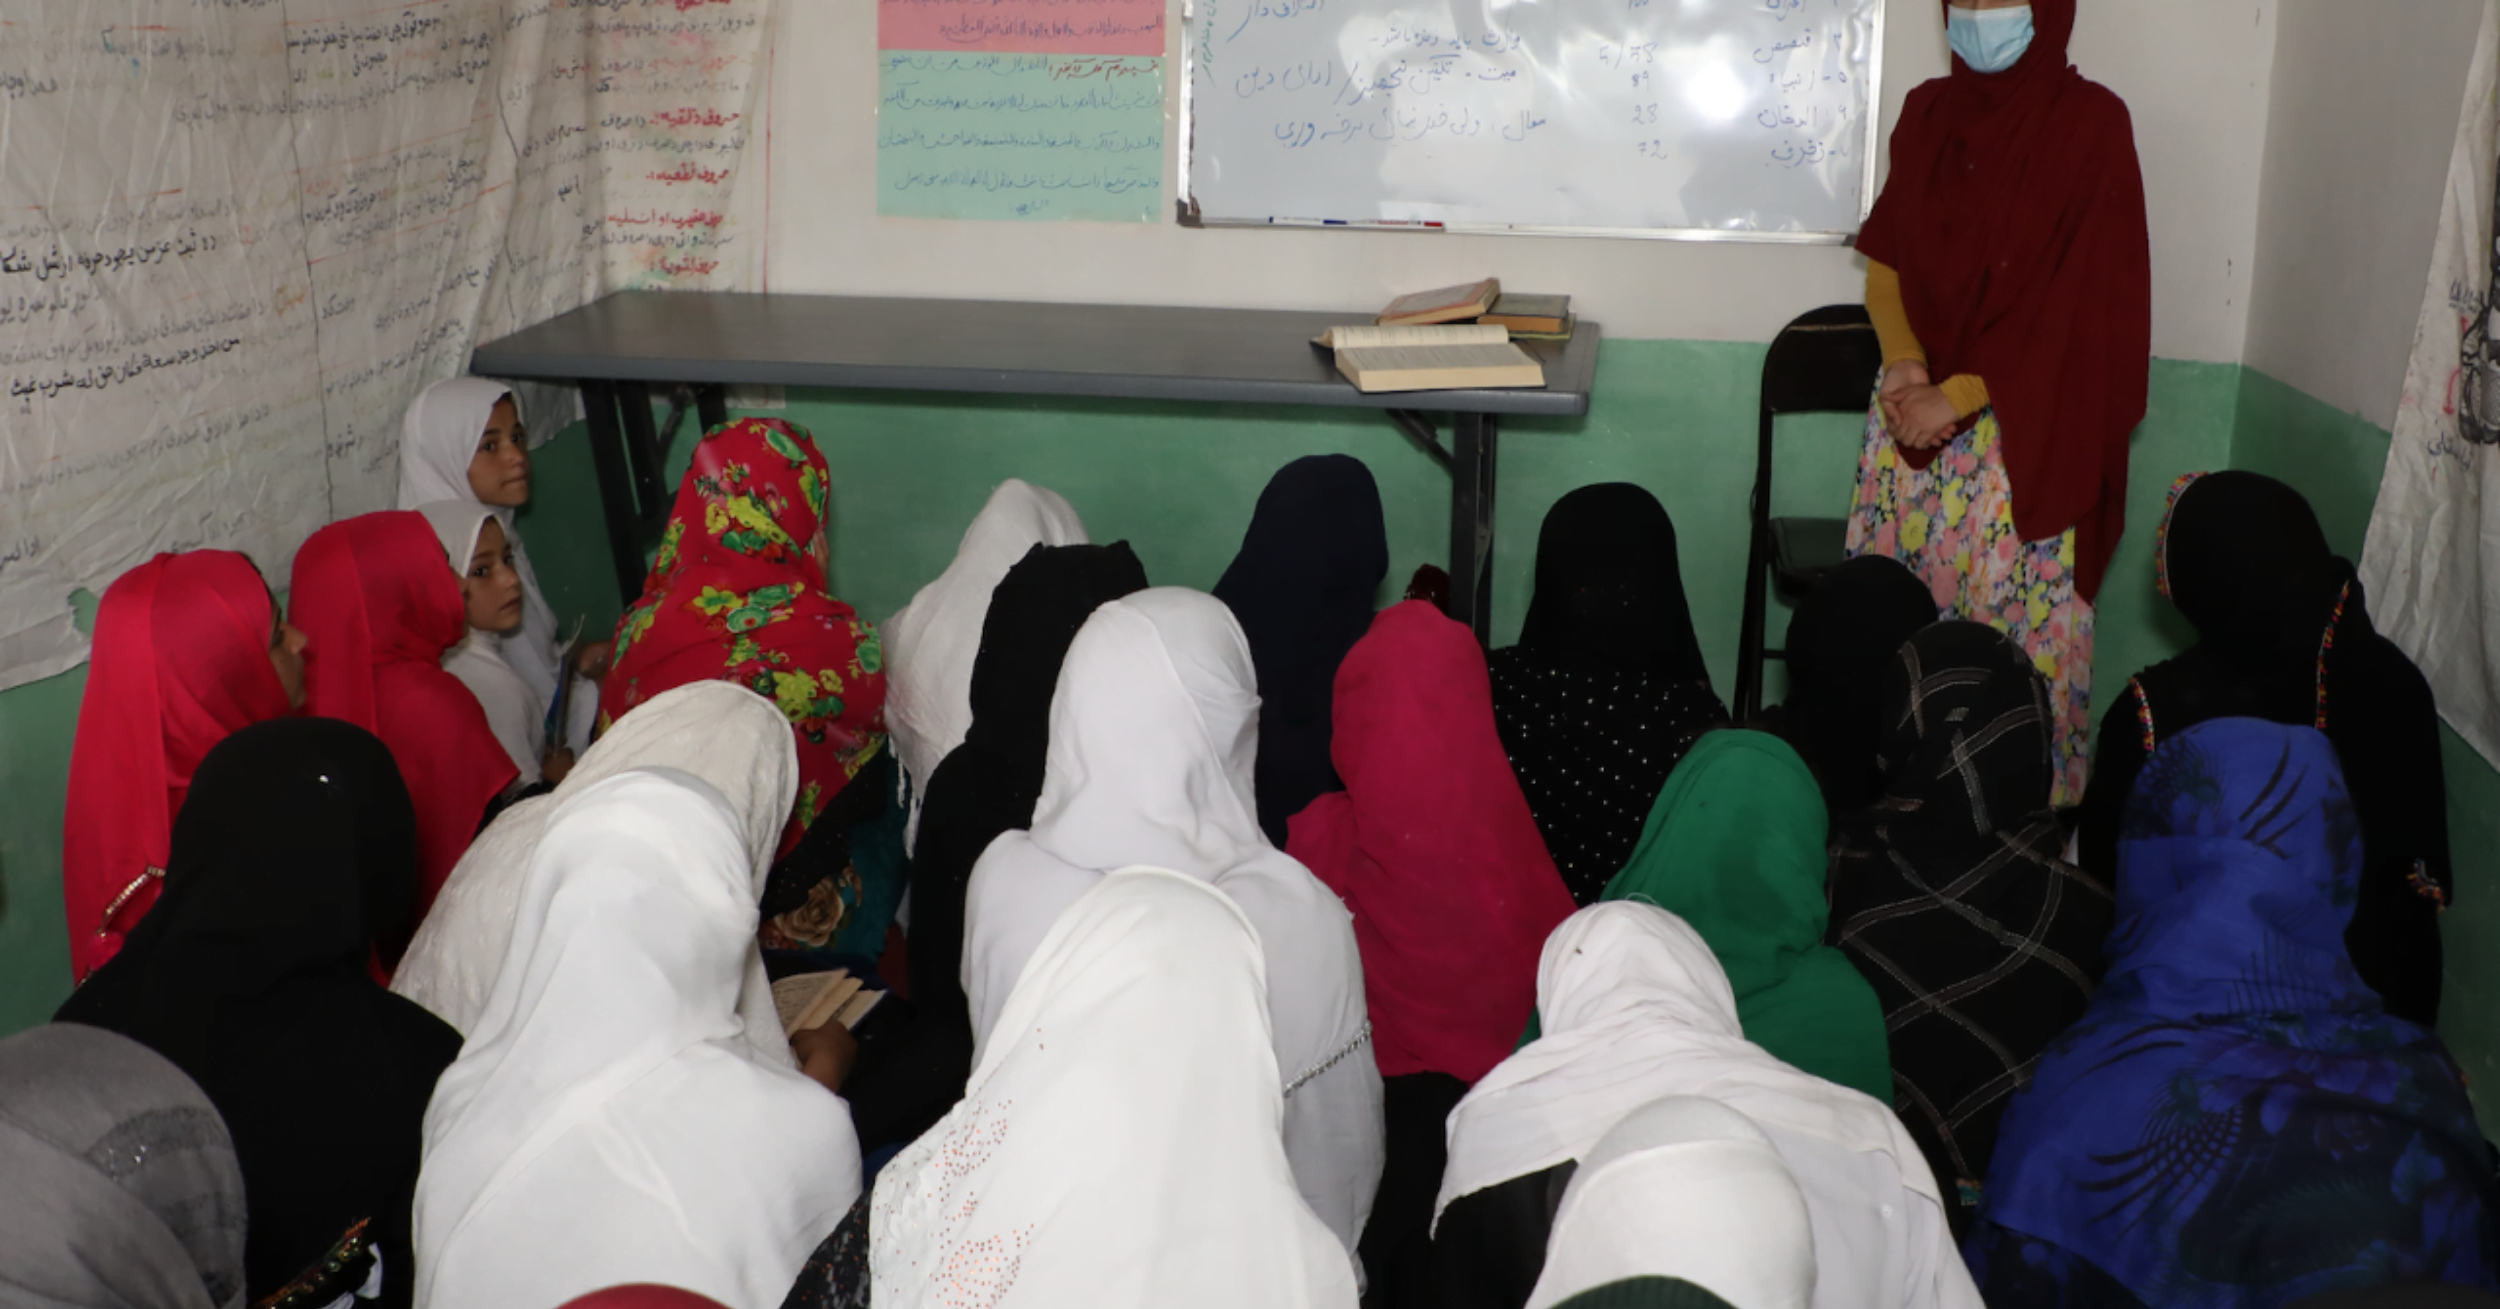 Teaching at a madrassa (Islamic religious school for girls) in a rural province of Afghanistan, before the Taliban takeover.